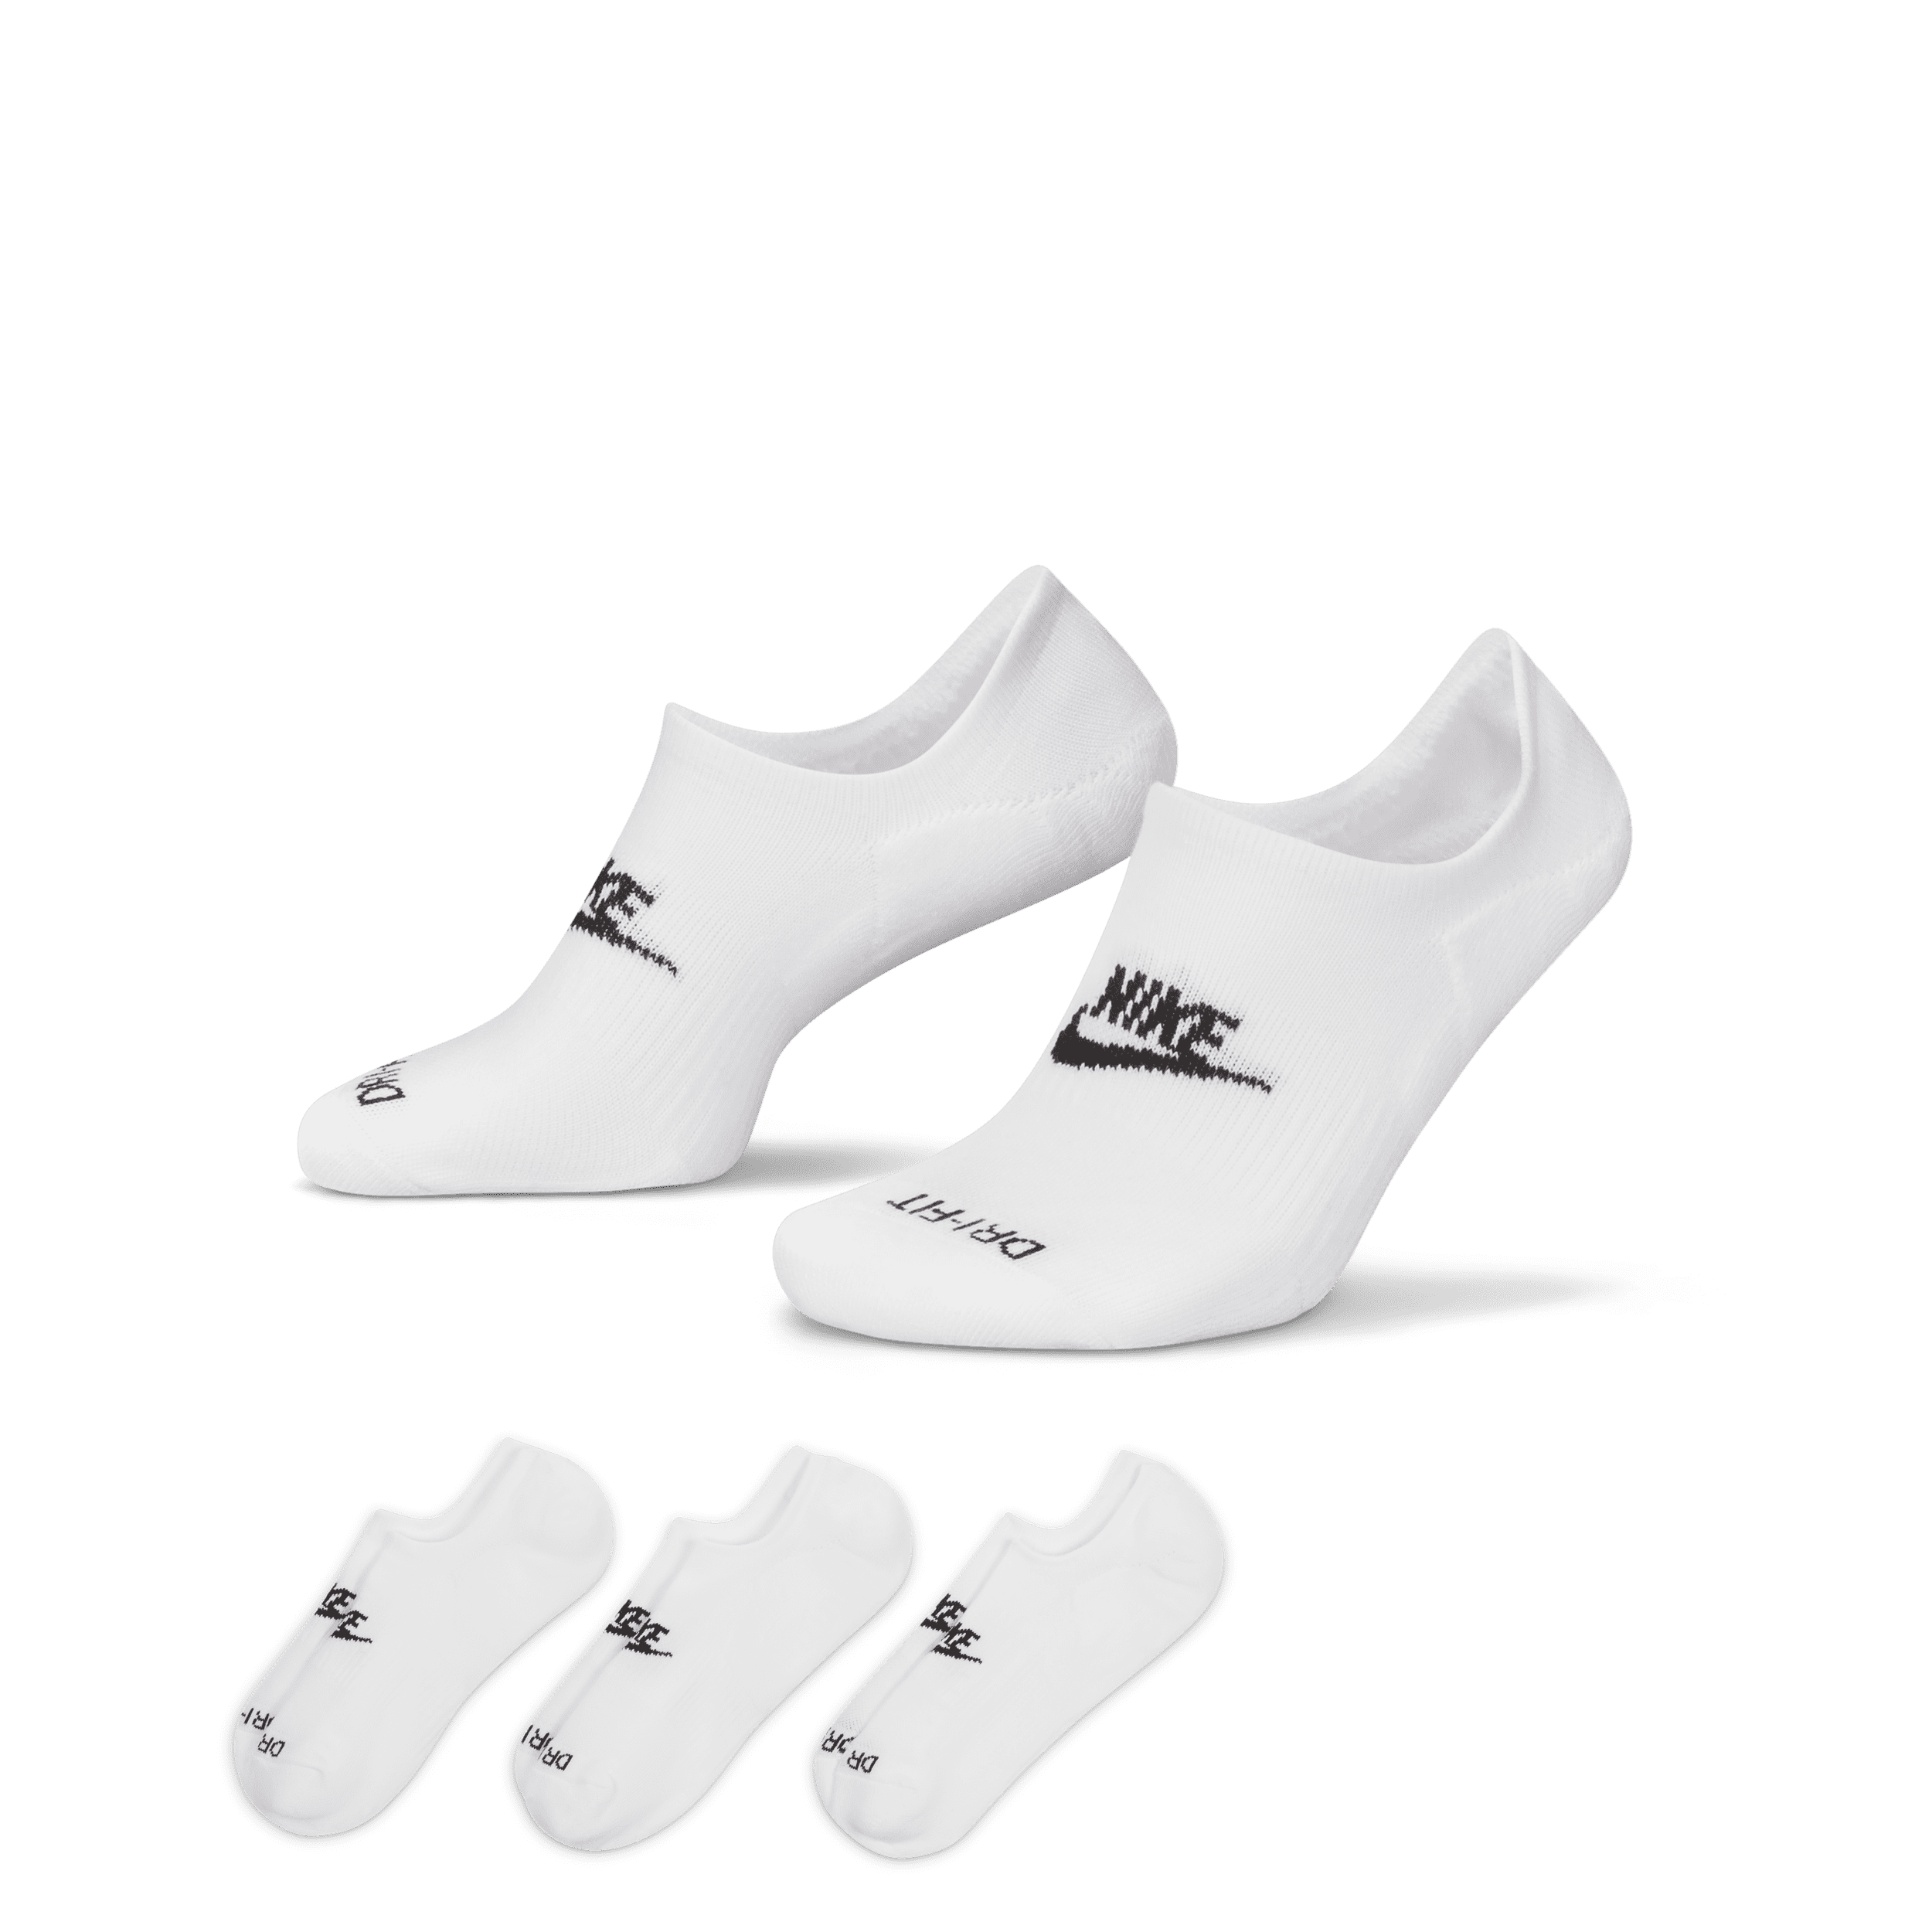 Everyday Plus Cushioned Nike Footie Calcetines - Blanco